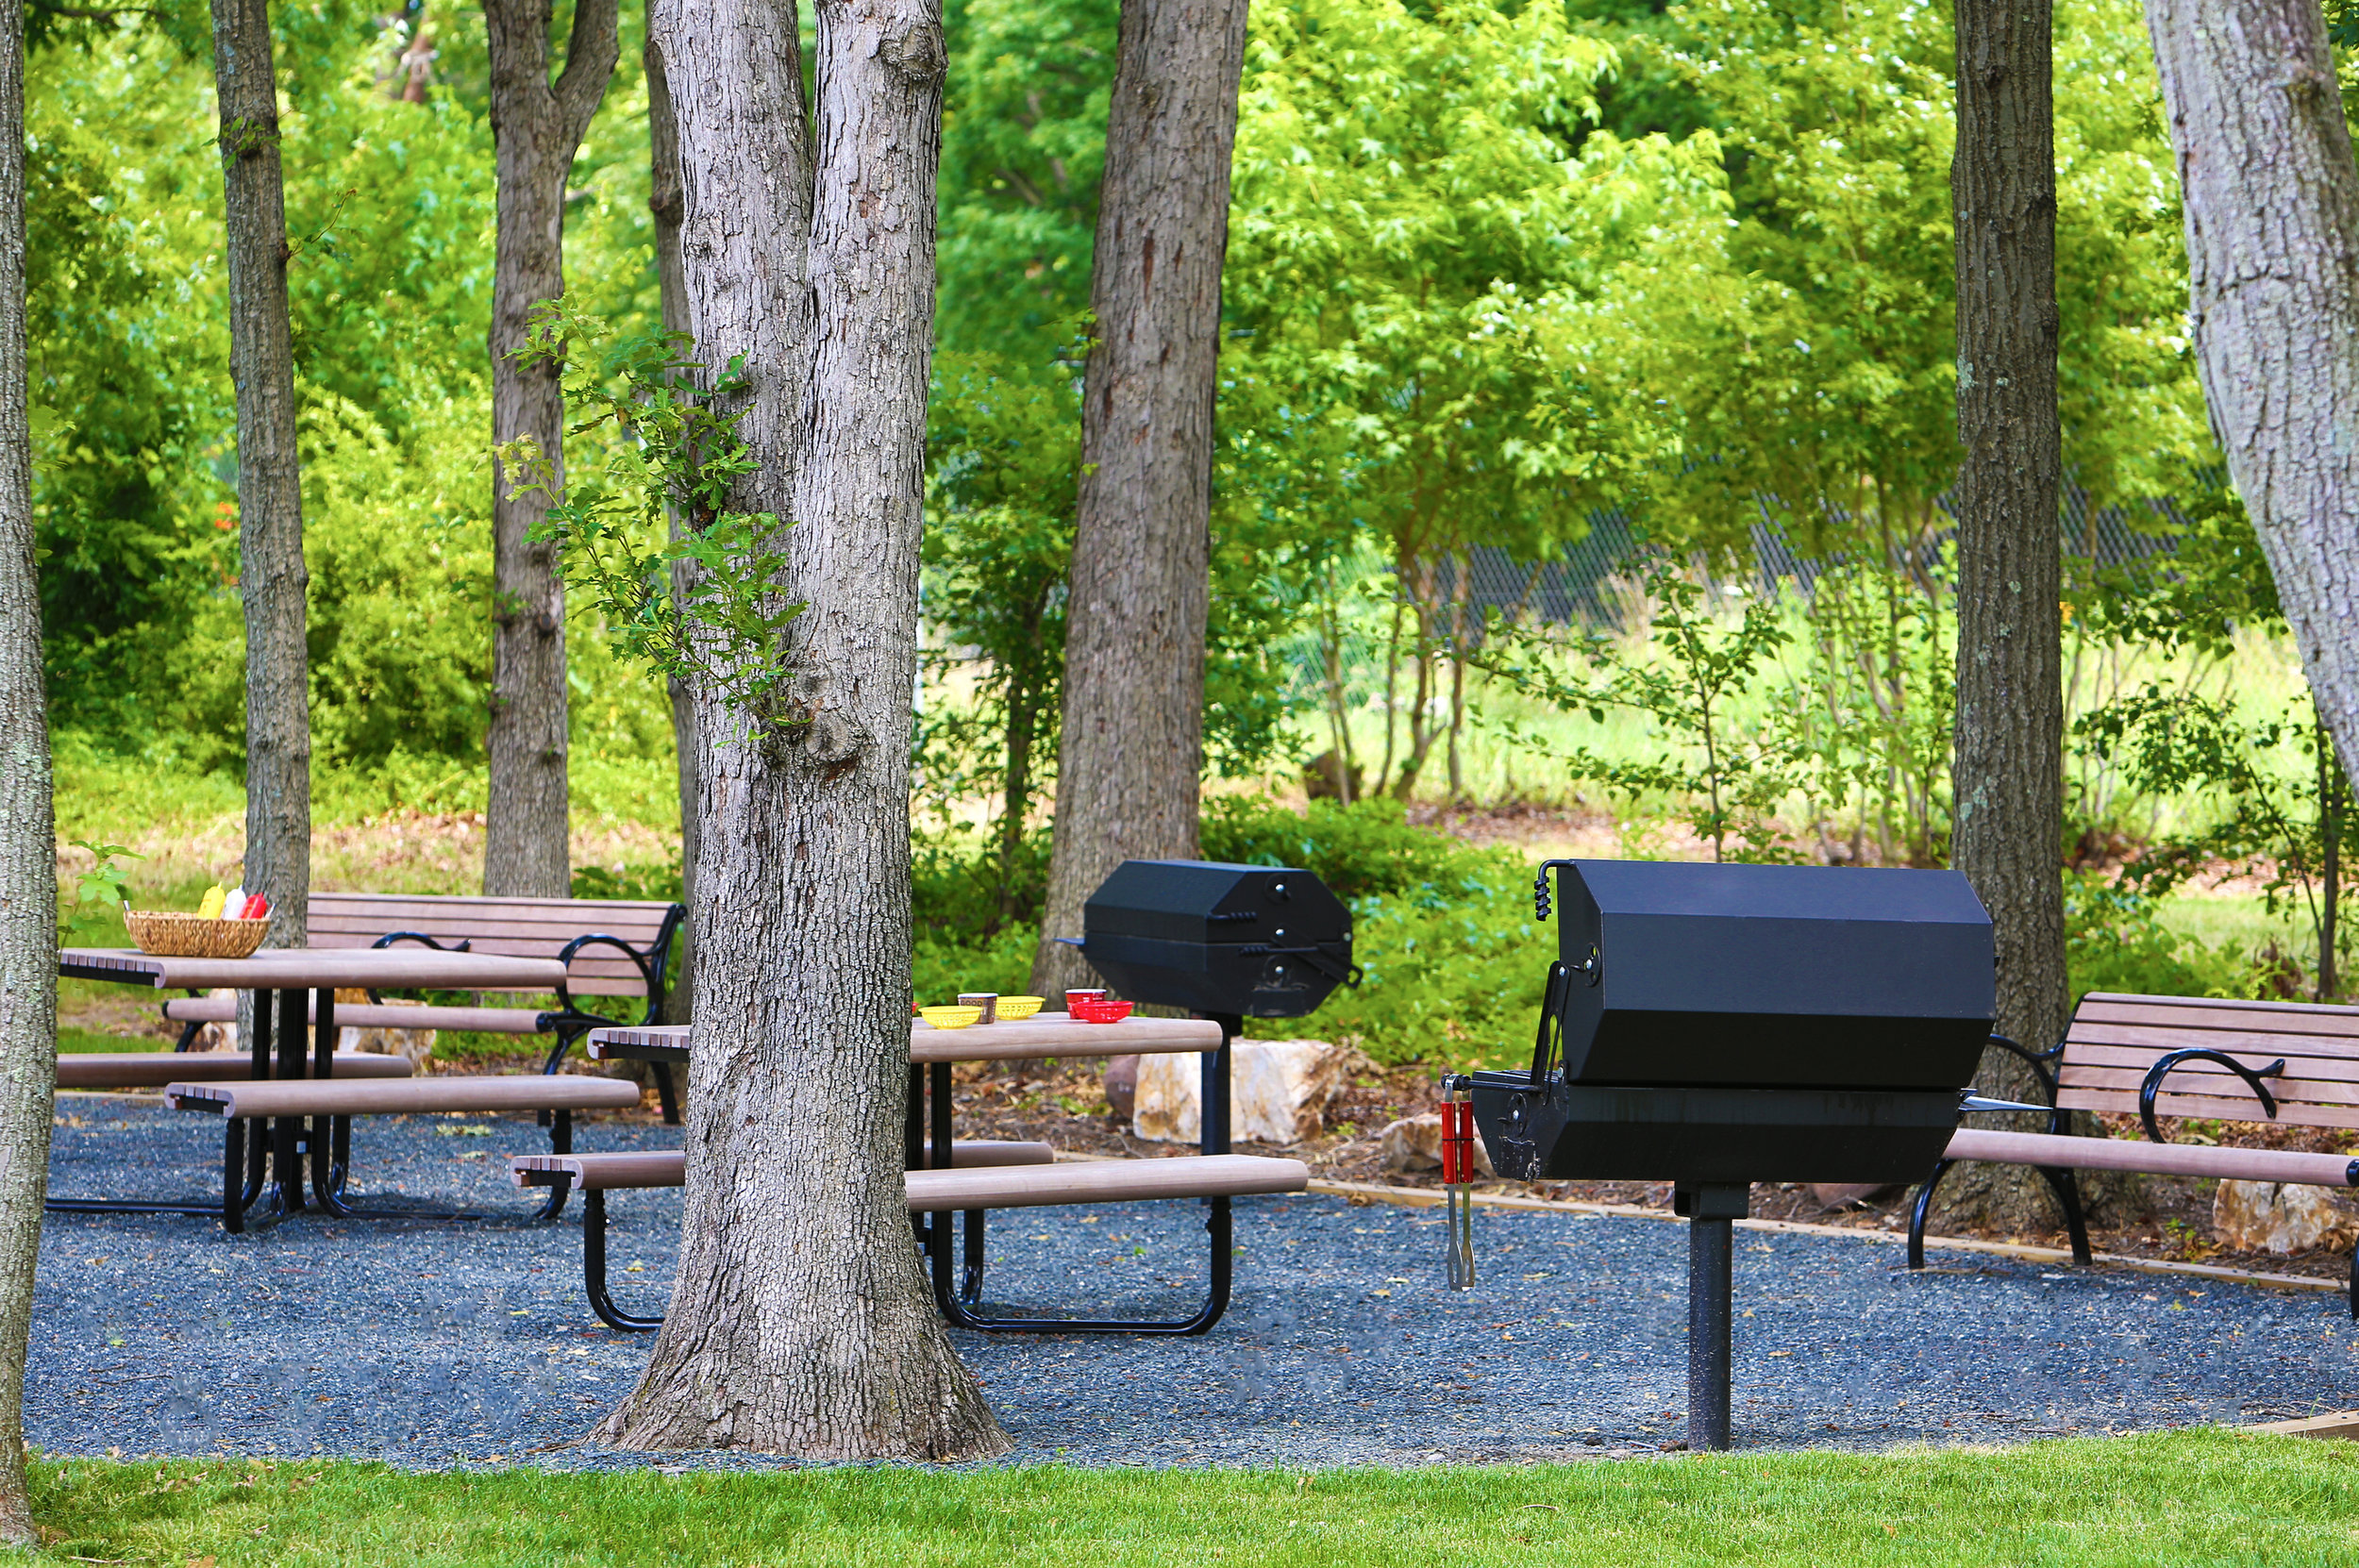 Picnic and grill area at Glen Oaks apartments